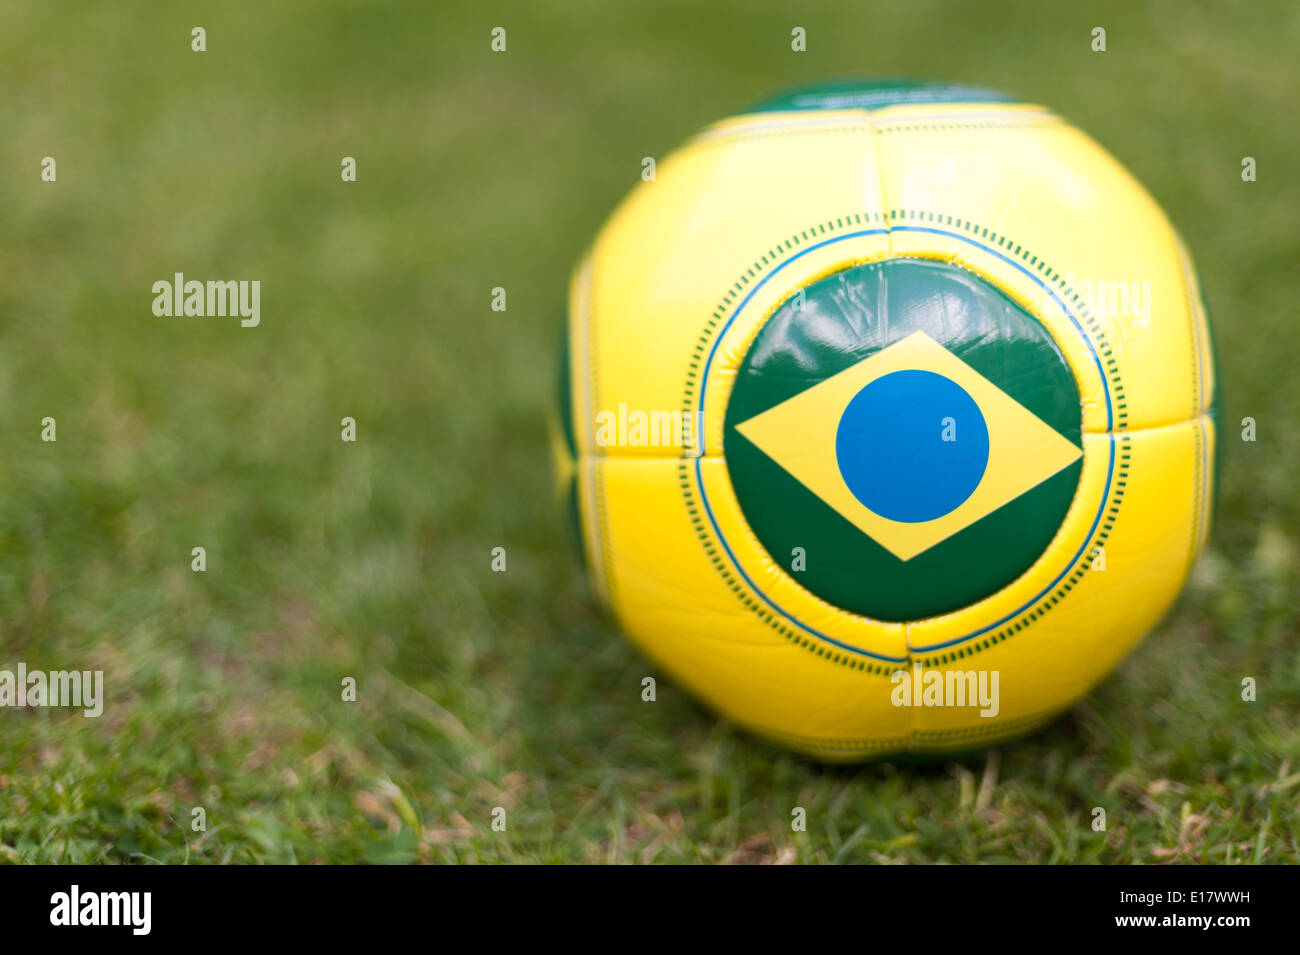 Football with Brazil flag for Brazil World Cup 2014. Stock Photo